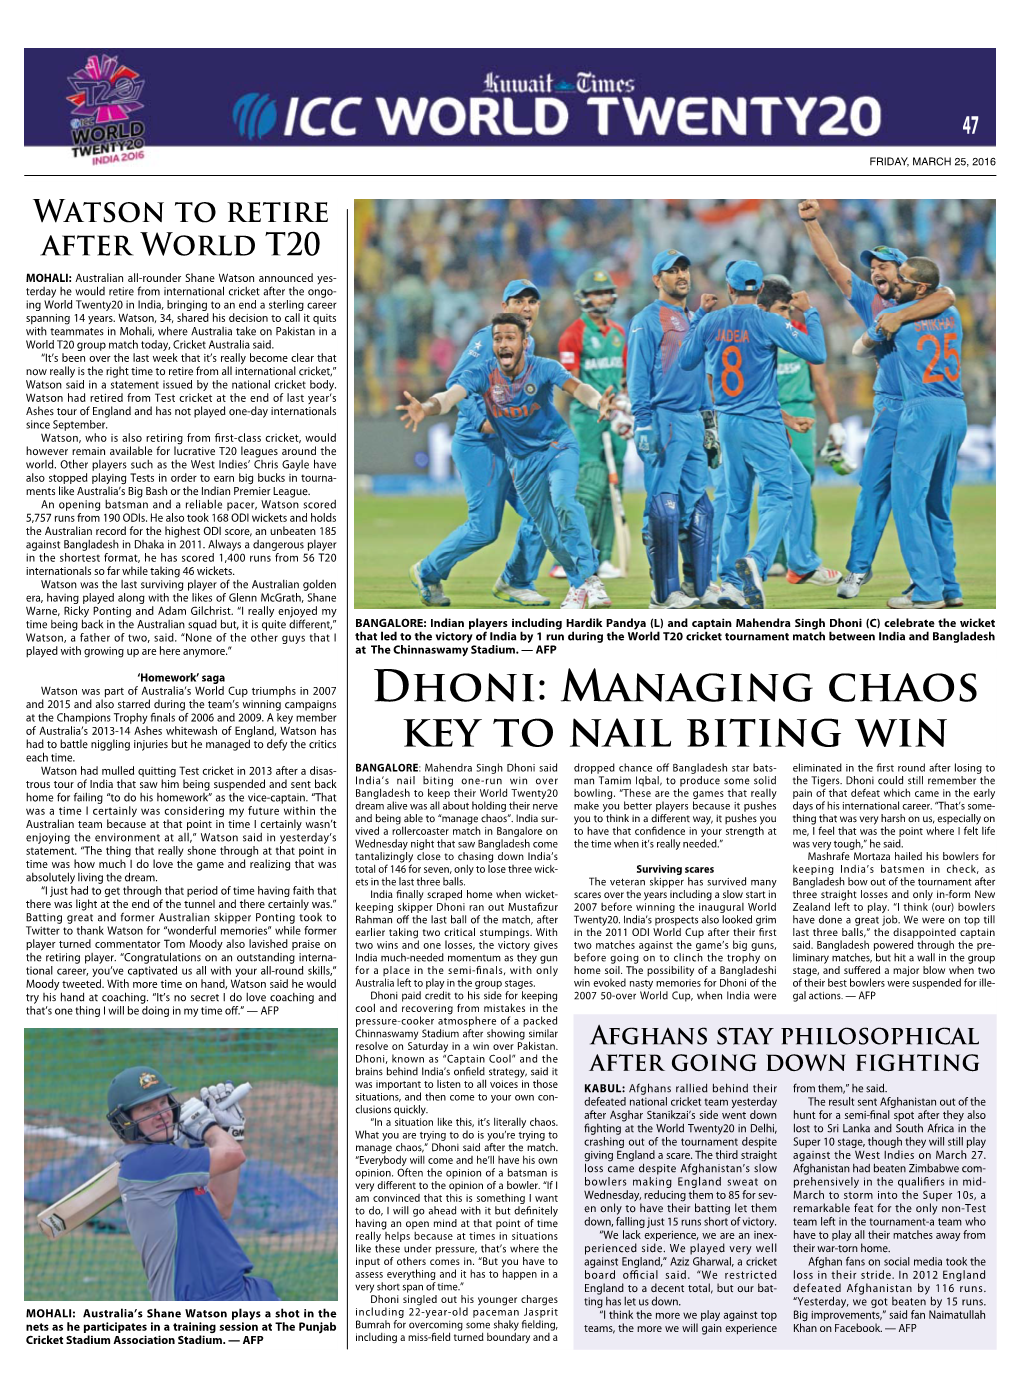 Dhoni (C) Celebrate the Wicket Watson, a Father of Two, Said